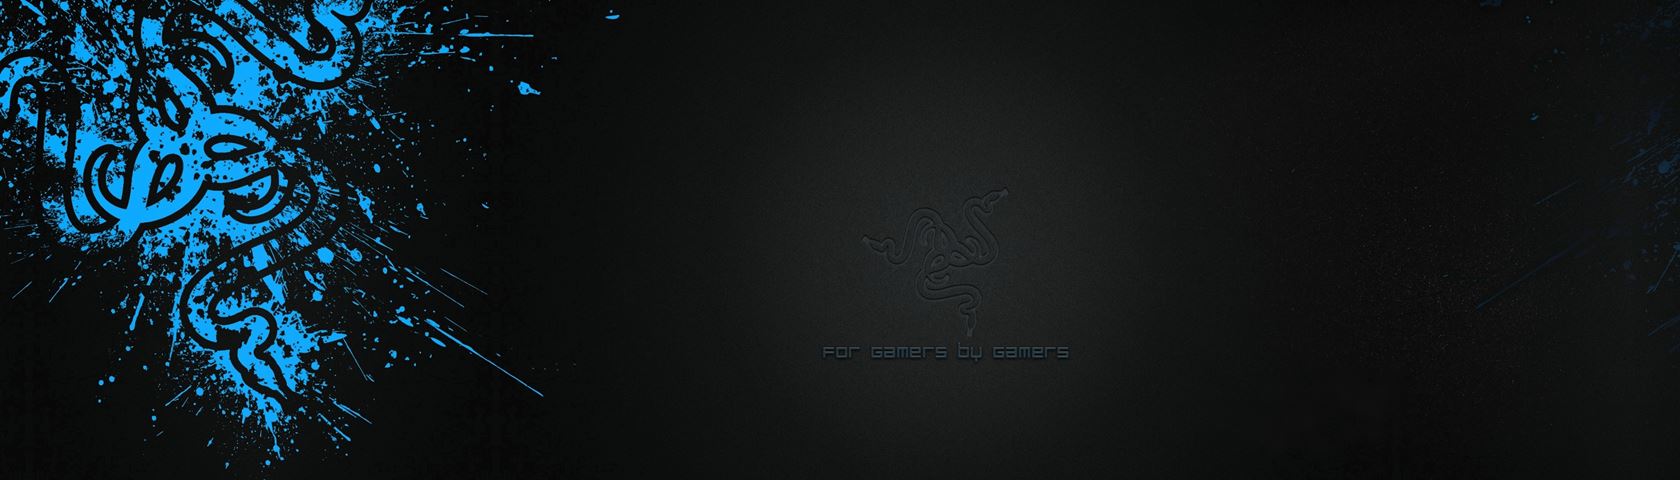 Razer Image Wallpaperfusion By Binary Fortress Software